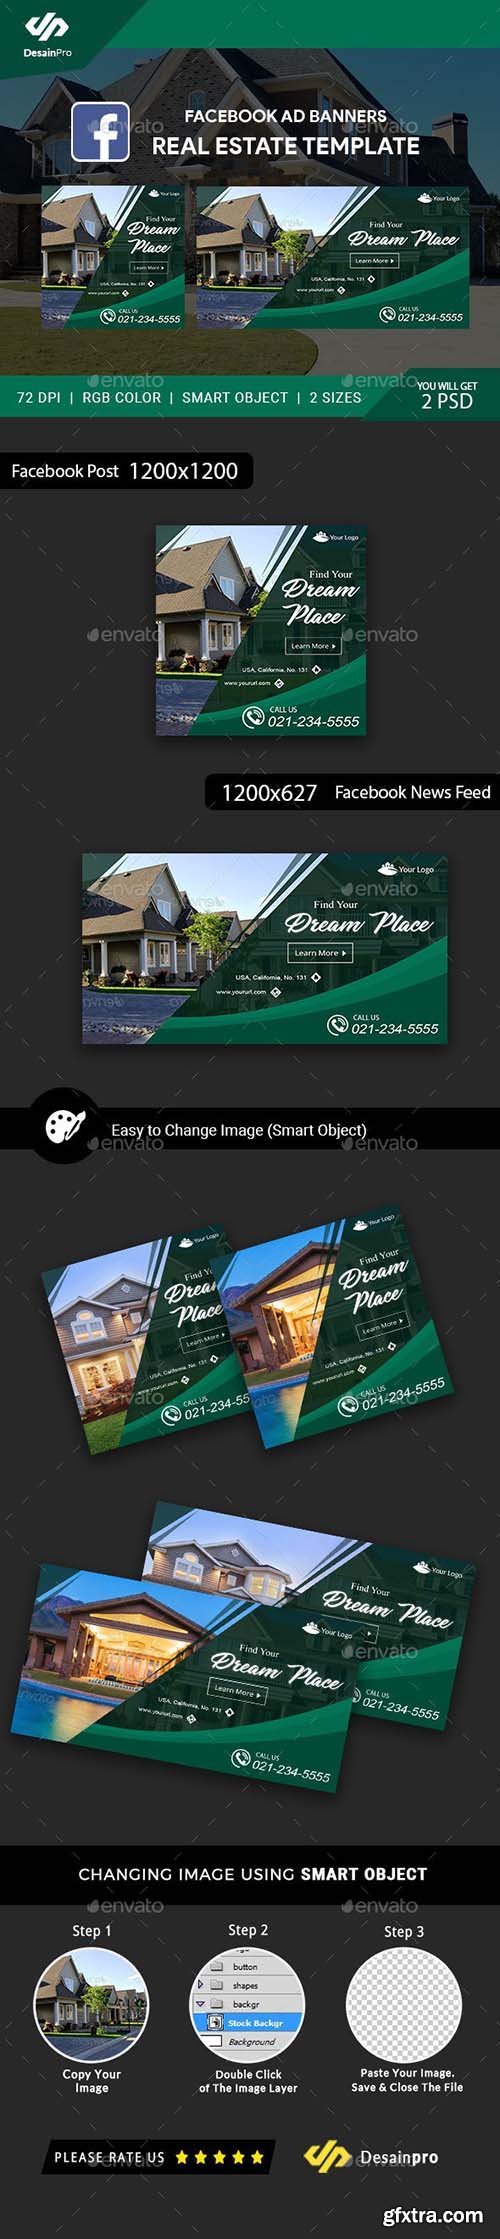 GR - Real Estate FB Ad Banners - AR 21402848